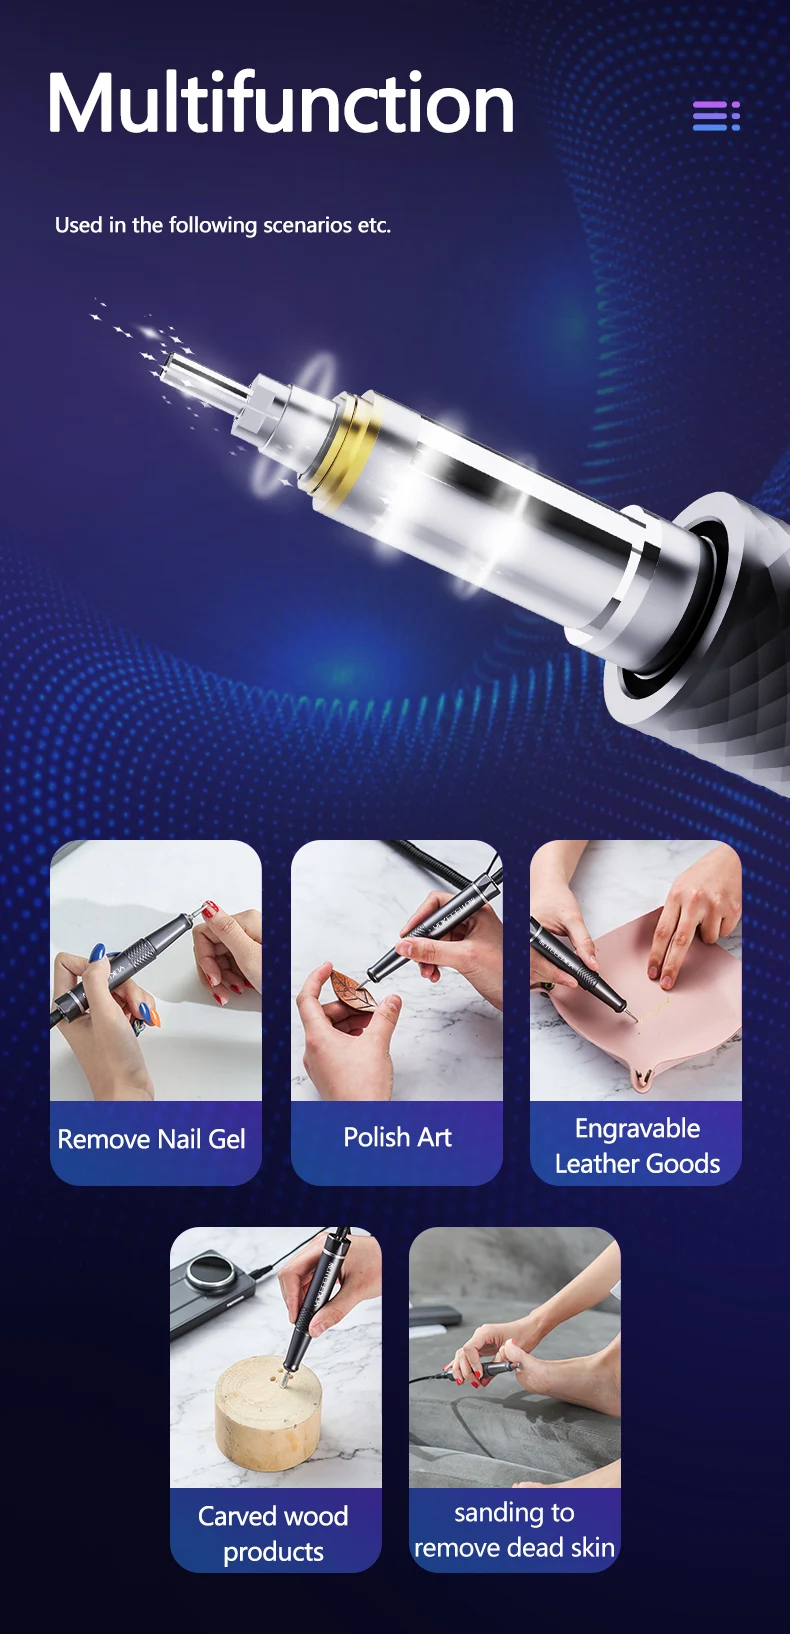 Black Brushless Portable Rechargeable Cordless Nail Drill Machine